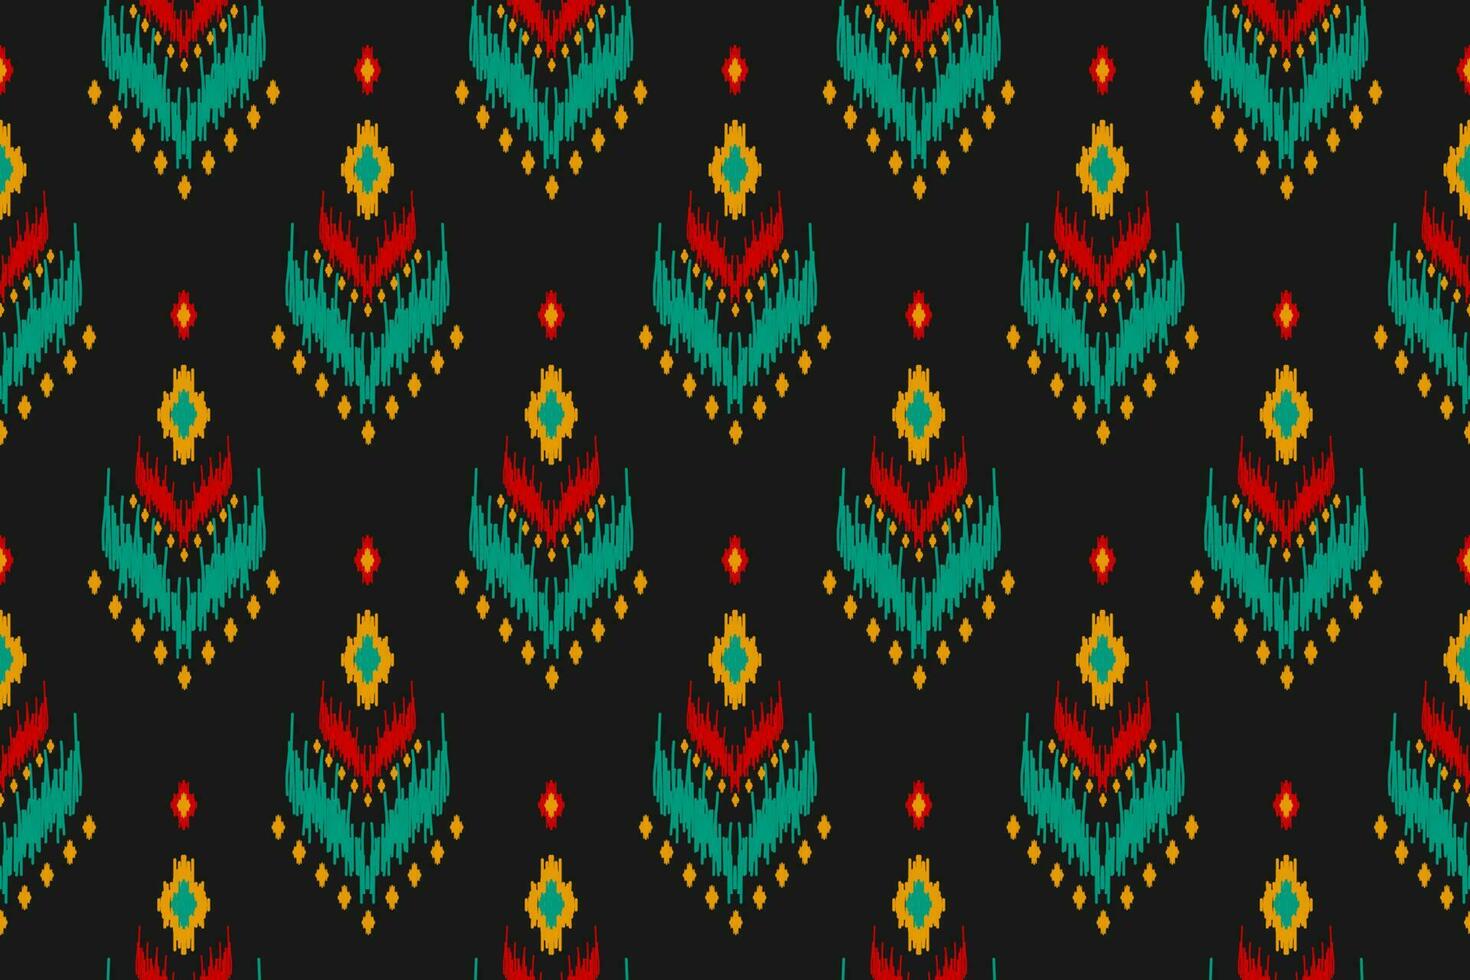 Ethnic ikat seamless pattern in tribal. American, Mexican style. Aztec geometric ornament print. vector